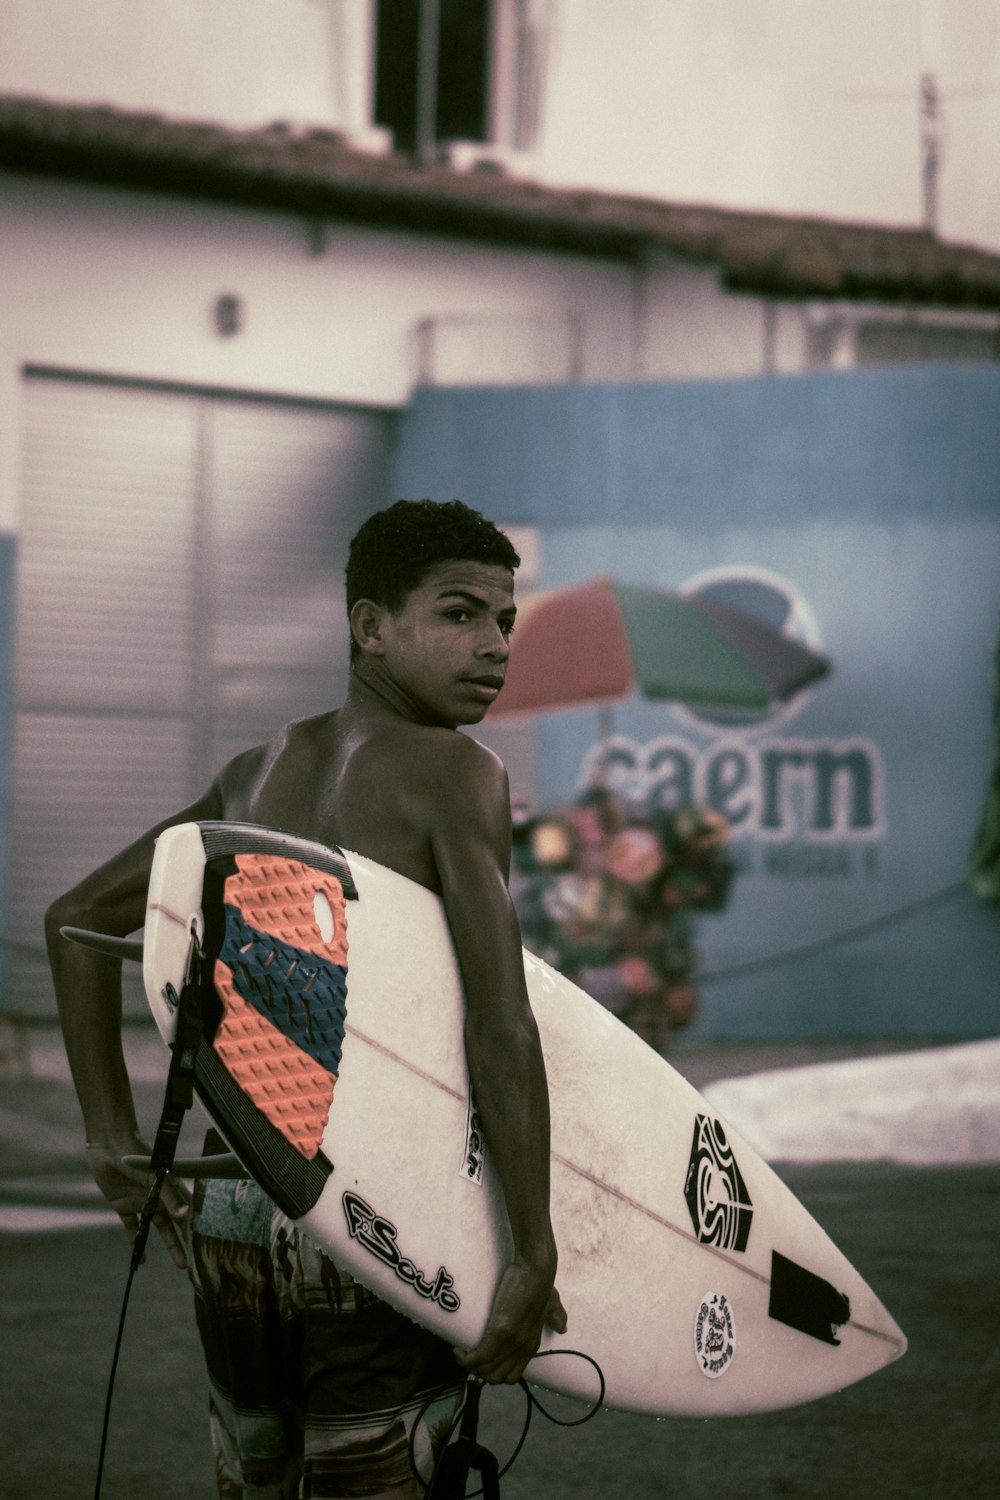 topless boy carrying surfboard